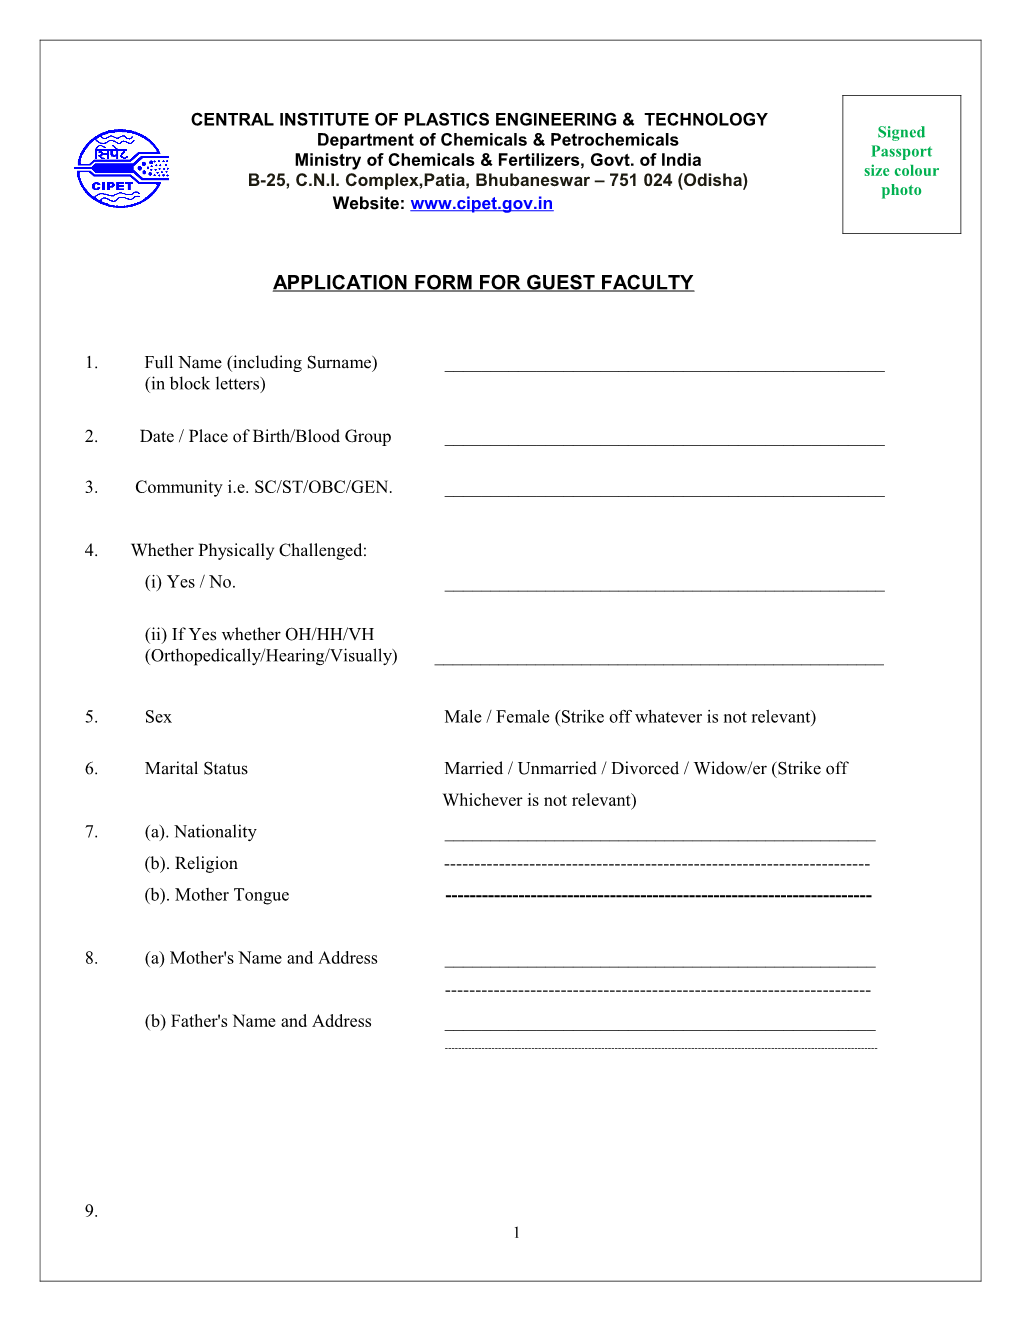 Application Form for GUEST FACULTY